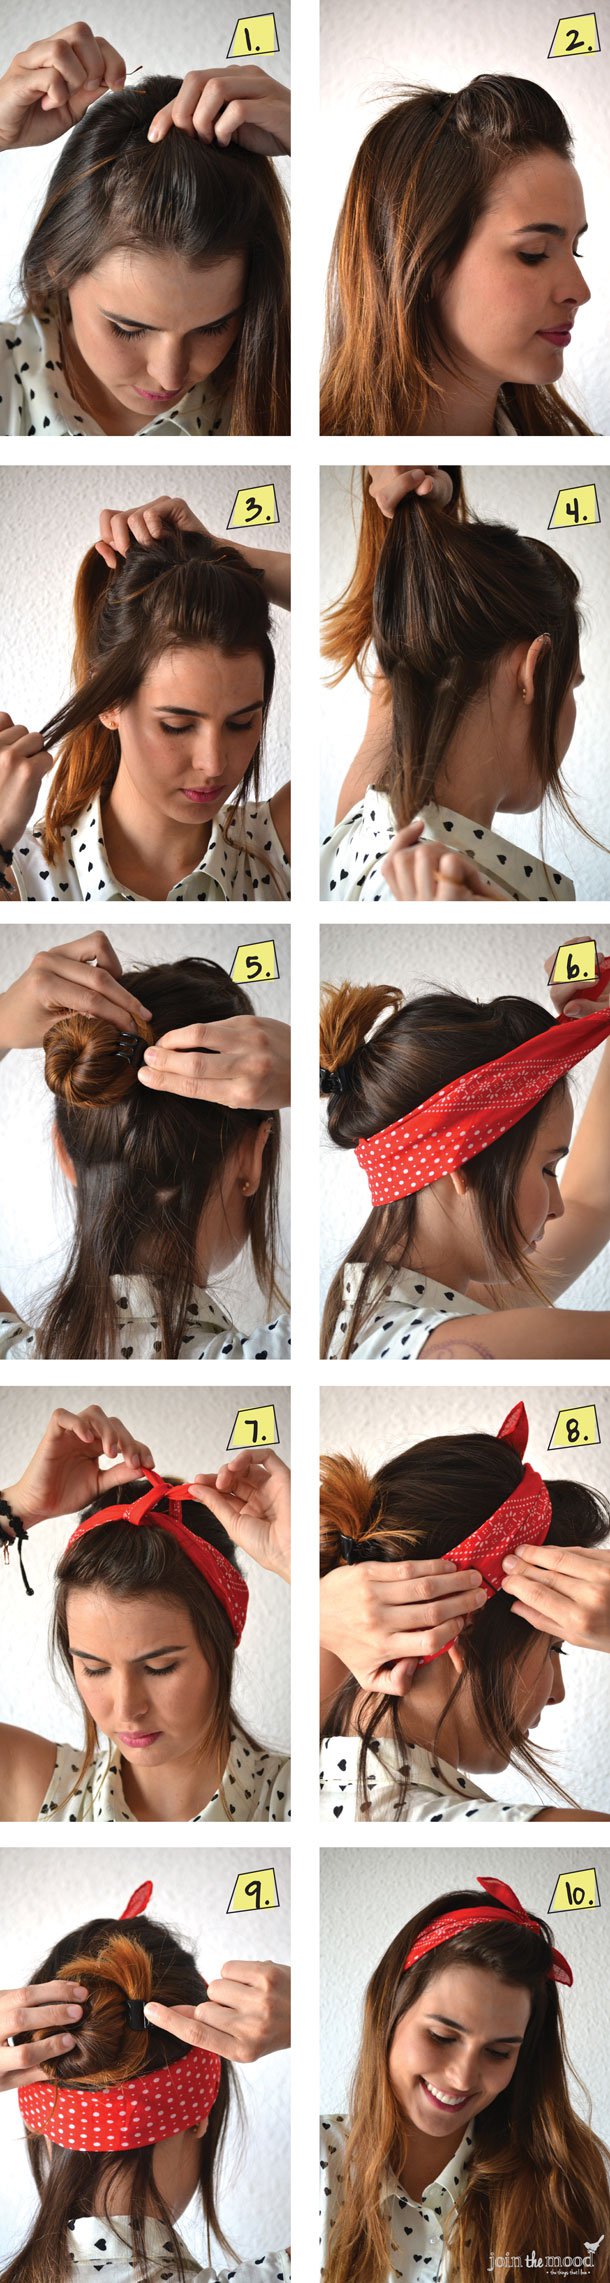 Half-up hairstyle with headscarf